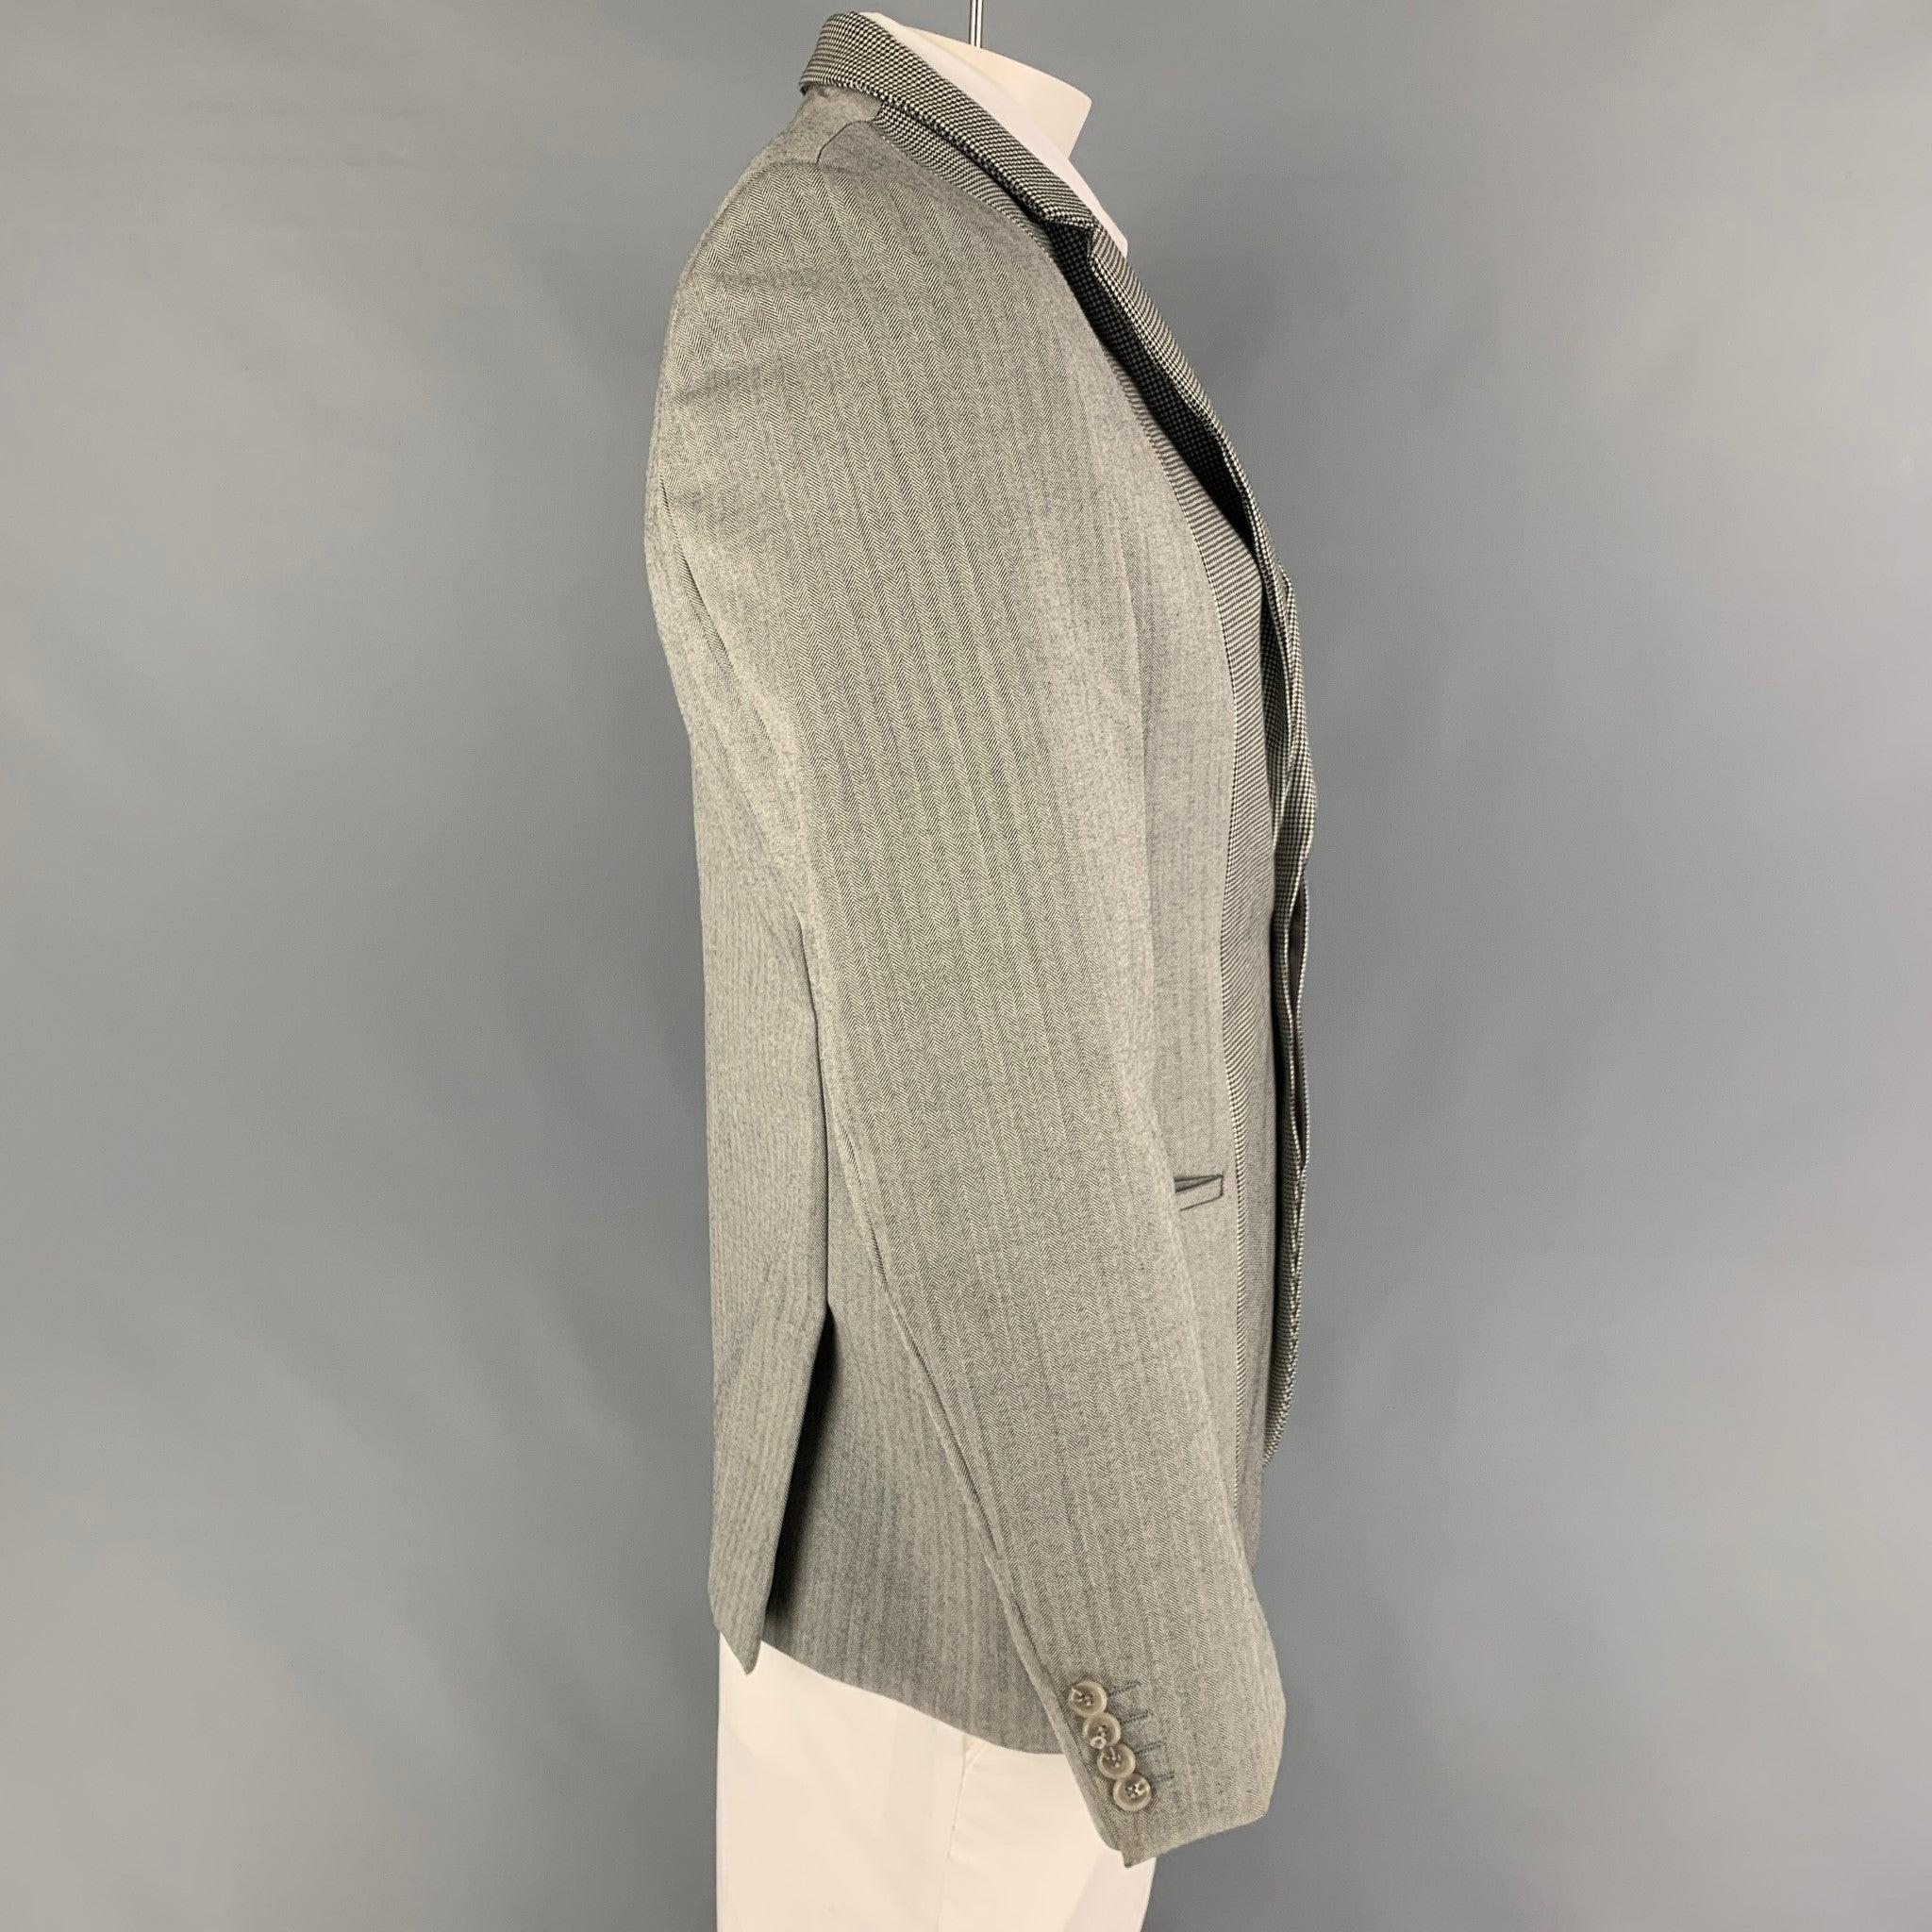 CALVIN KLEIN COLLECTION sport coat comes in a grey & black wool with a full liner featuring a notch lapel, slit pockets, double back vent, and a hidden double button closure.
Very Good
Pre-Owned Condition. 

Marked:   50/40 

Measurements: 
